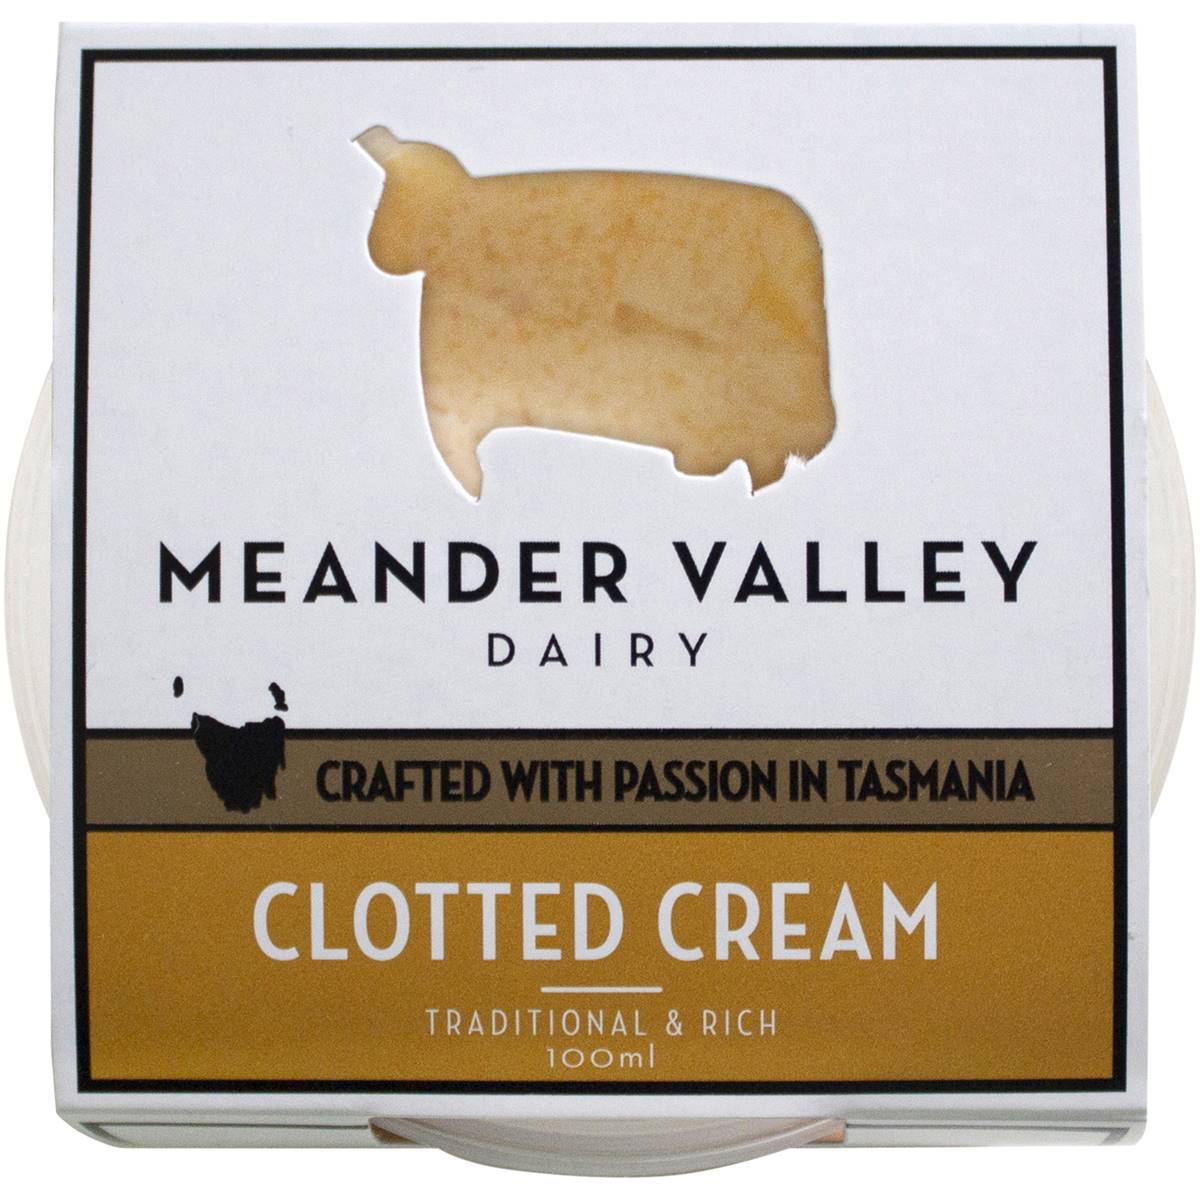 Calories in Meander Valley Clotted Cream